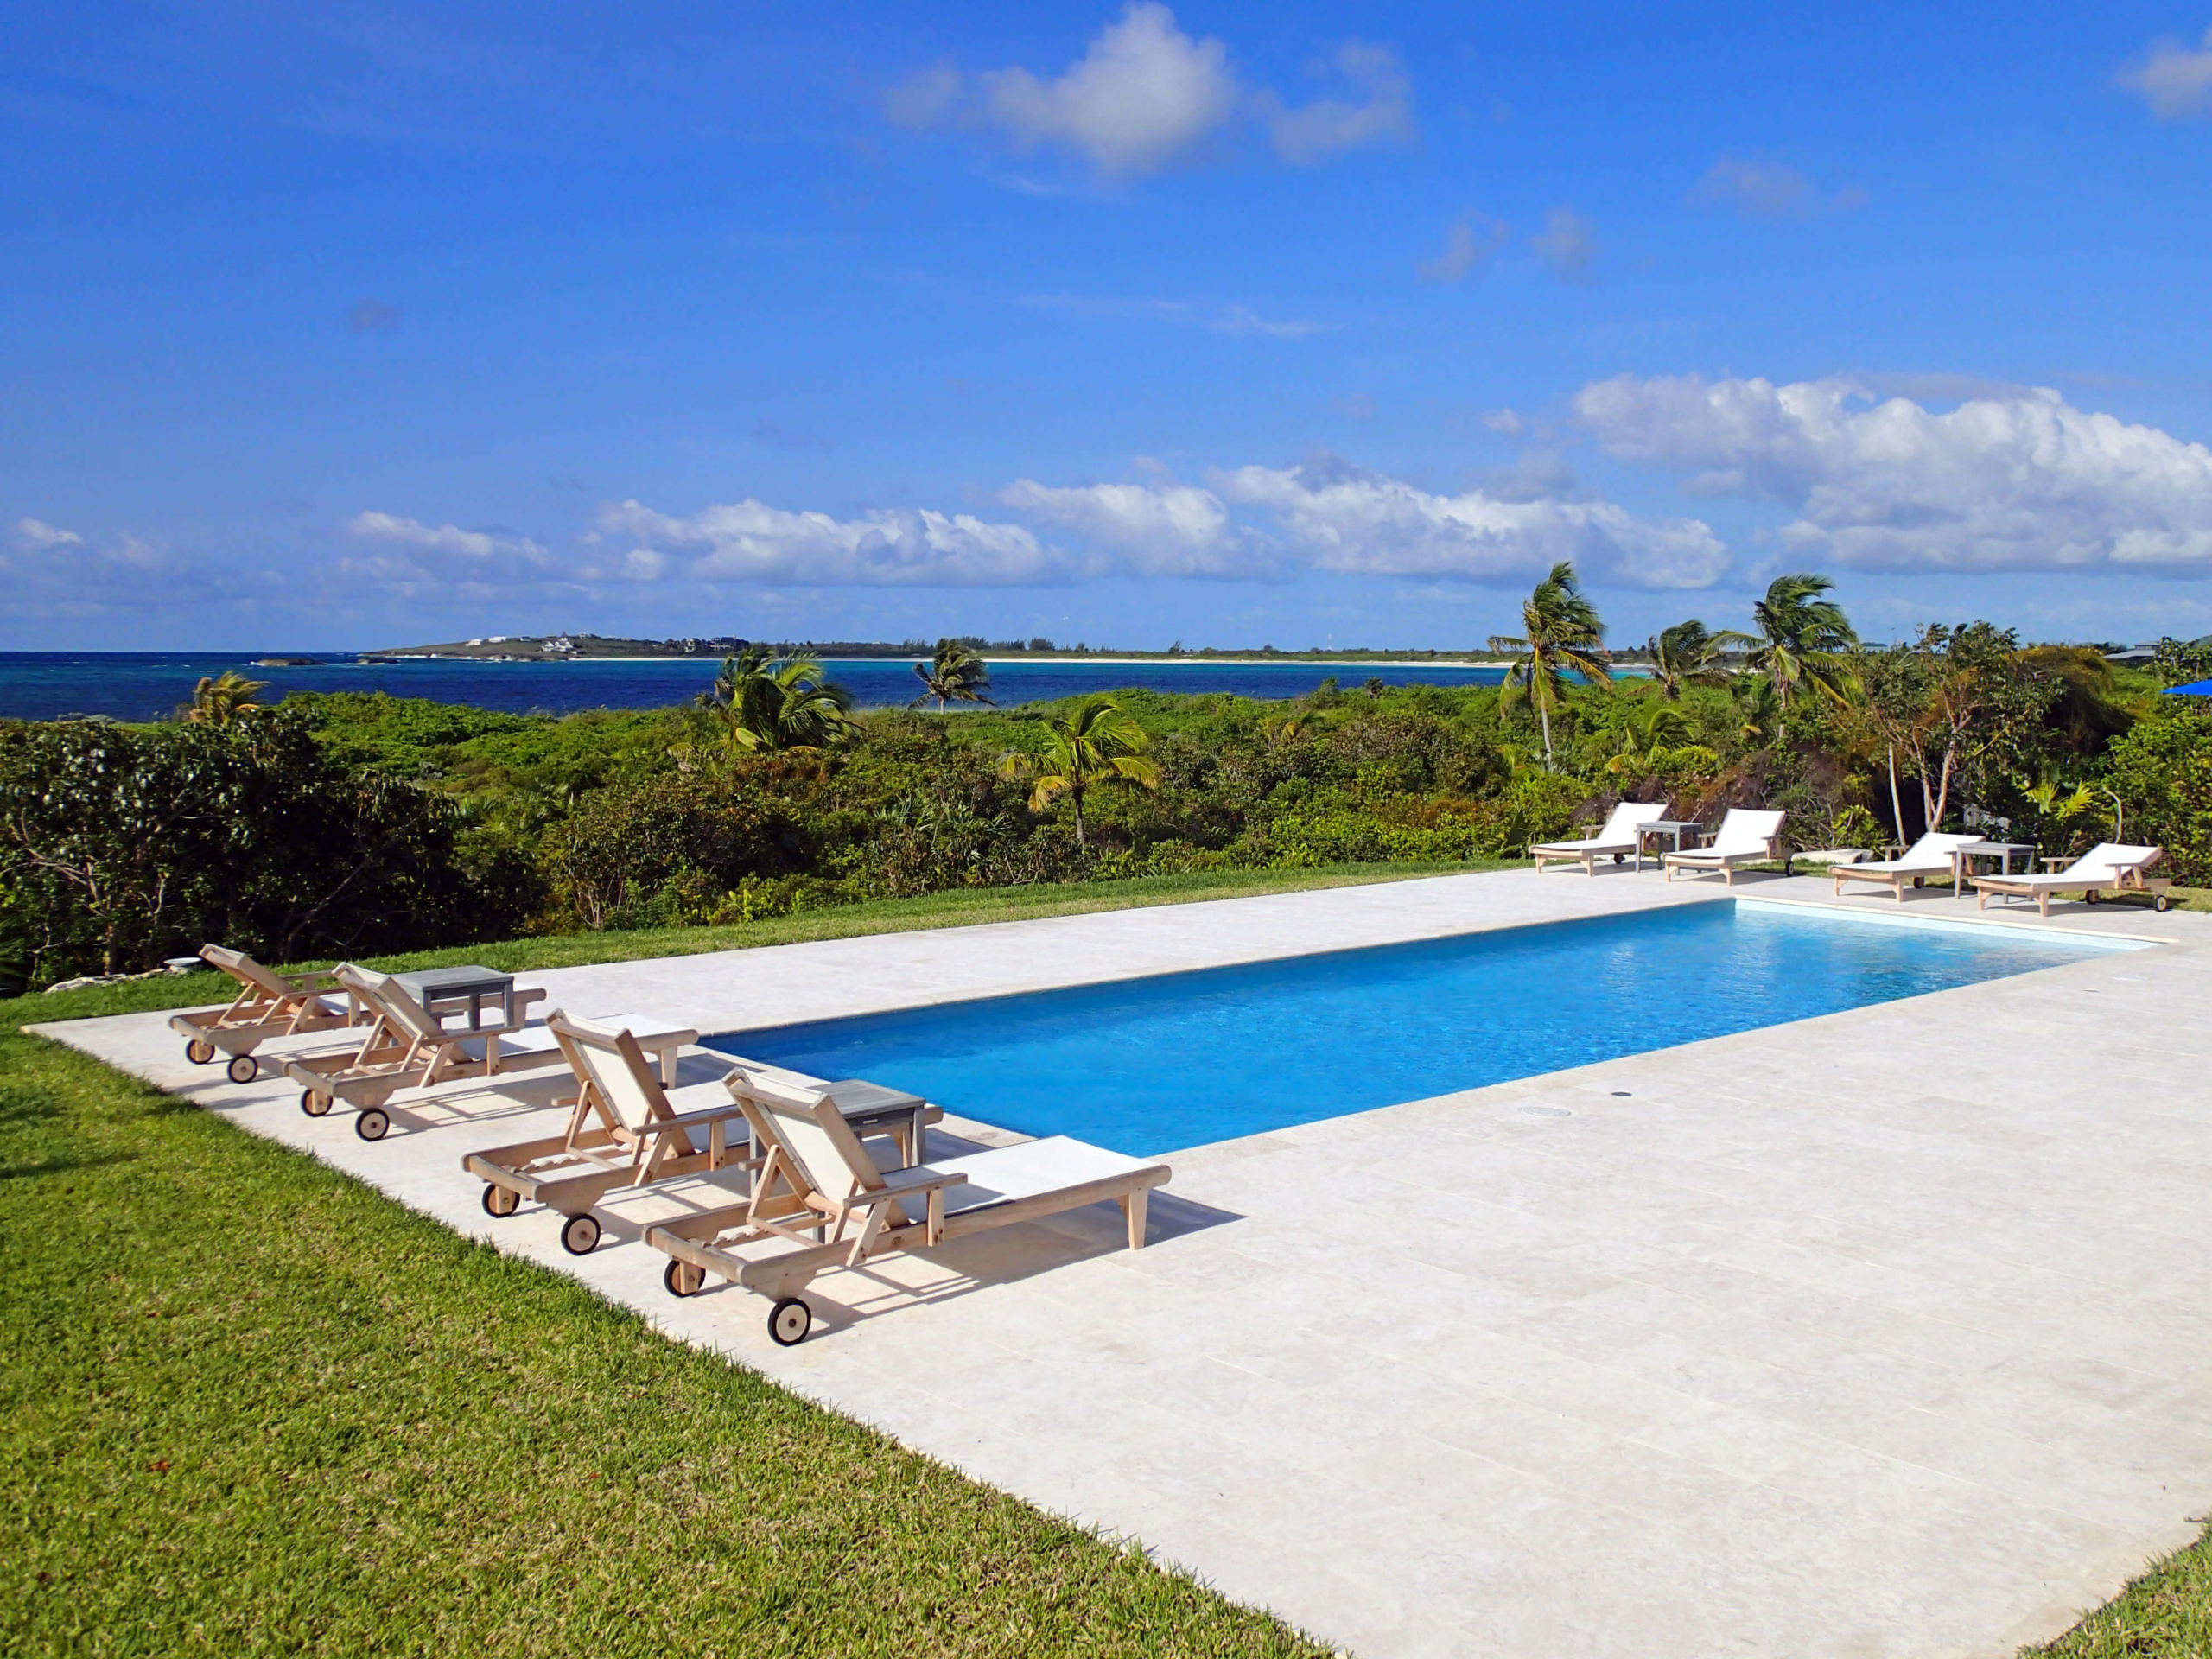 Pool with ocean view, showcasing the premium coastal living at The Abaco Club.